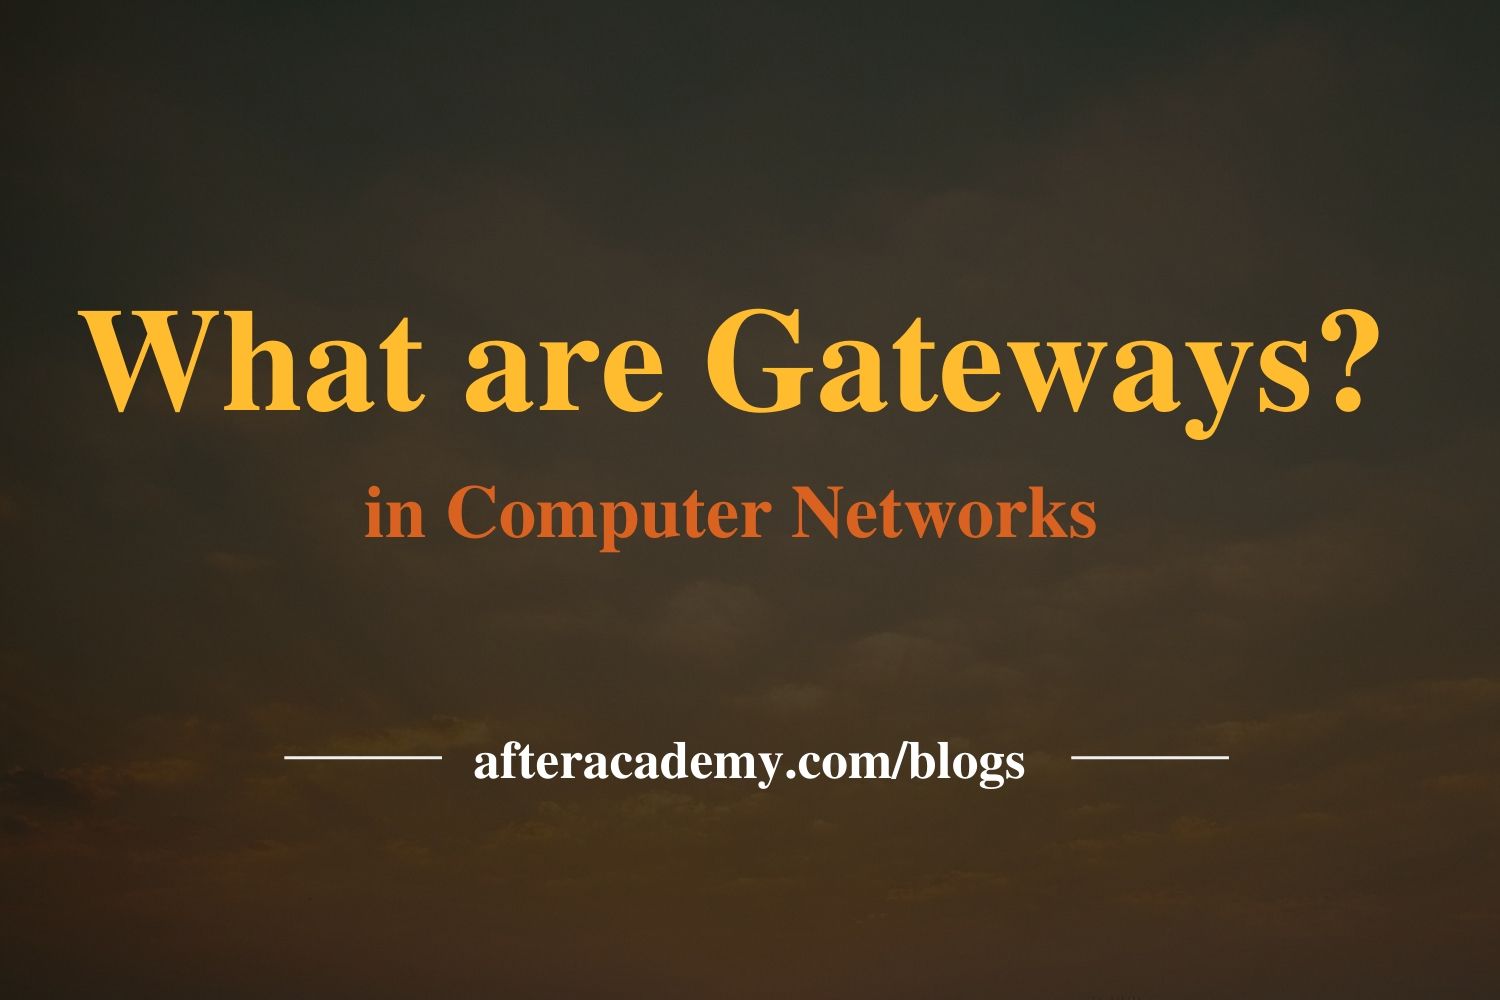 What are Gateways?